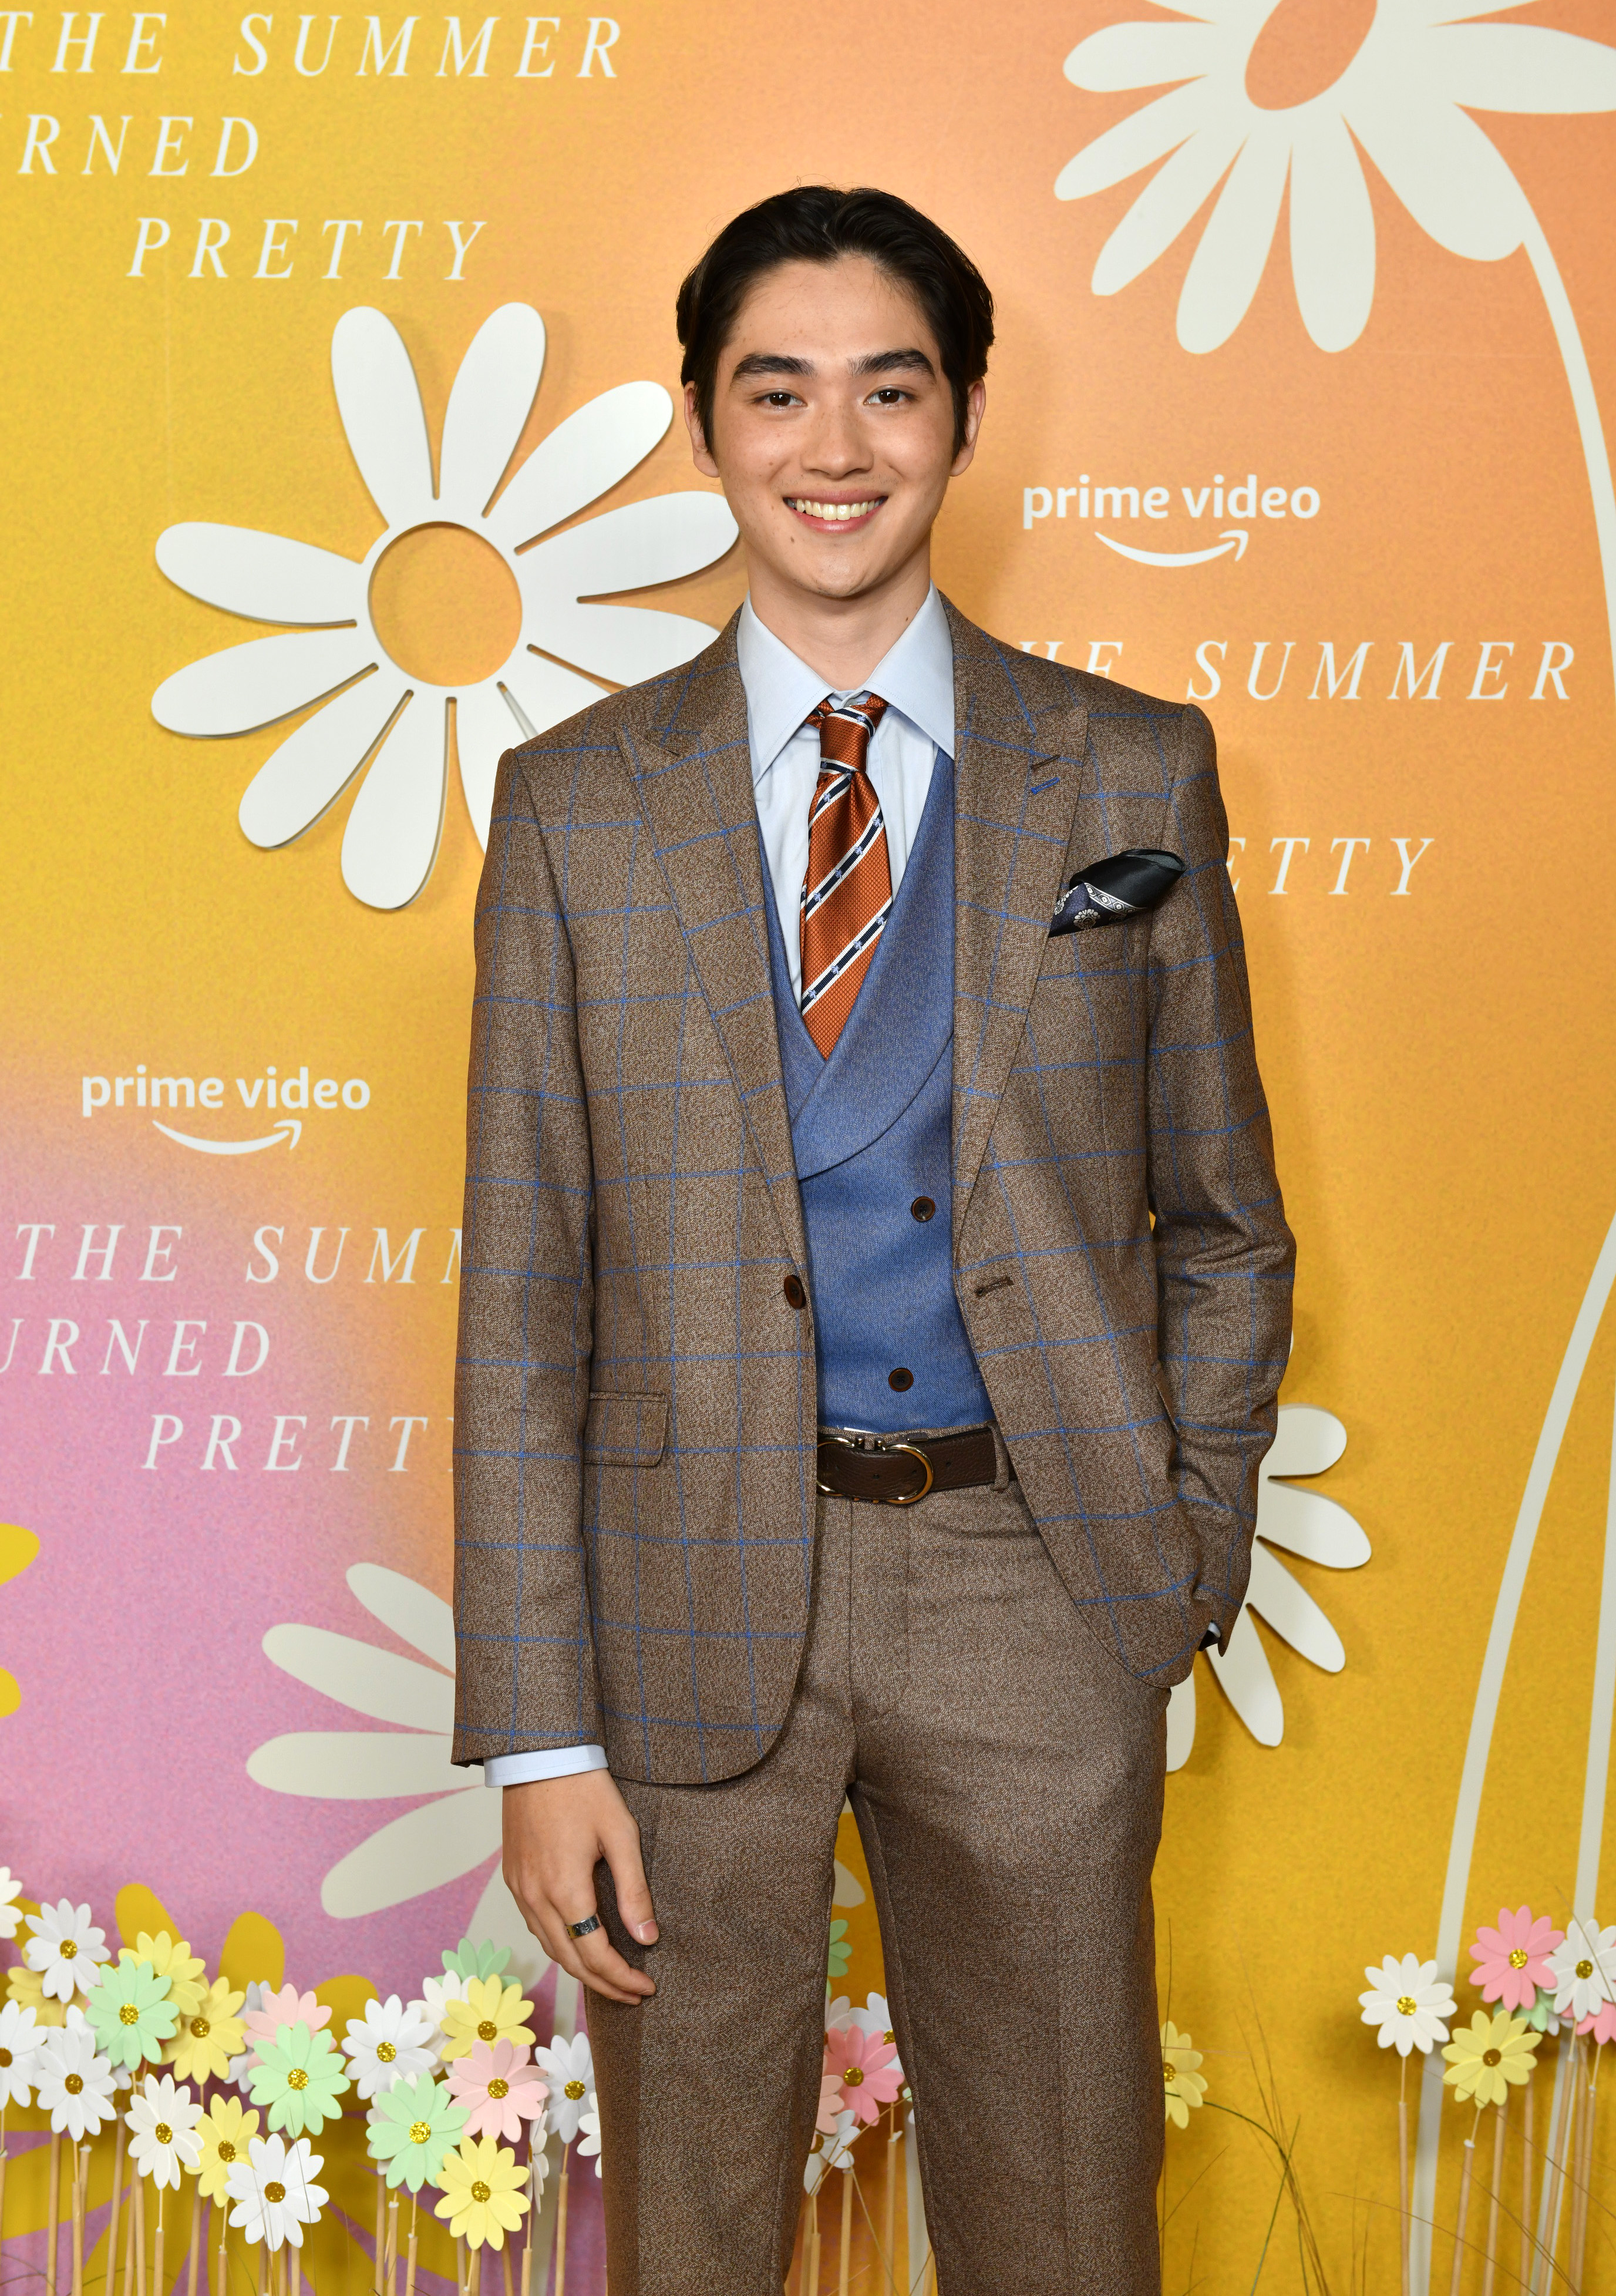 Sean Kaufman attends the New York City premiere of the Prime Video series "The Summer I Turned Pretty" on June 14, 2022, in New York City. | Source: Getty Images